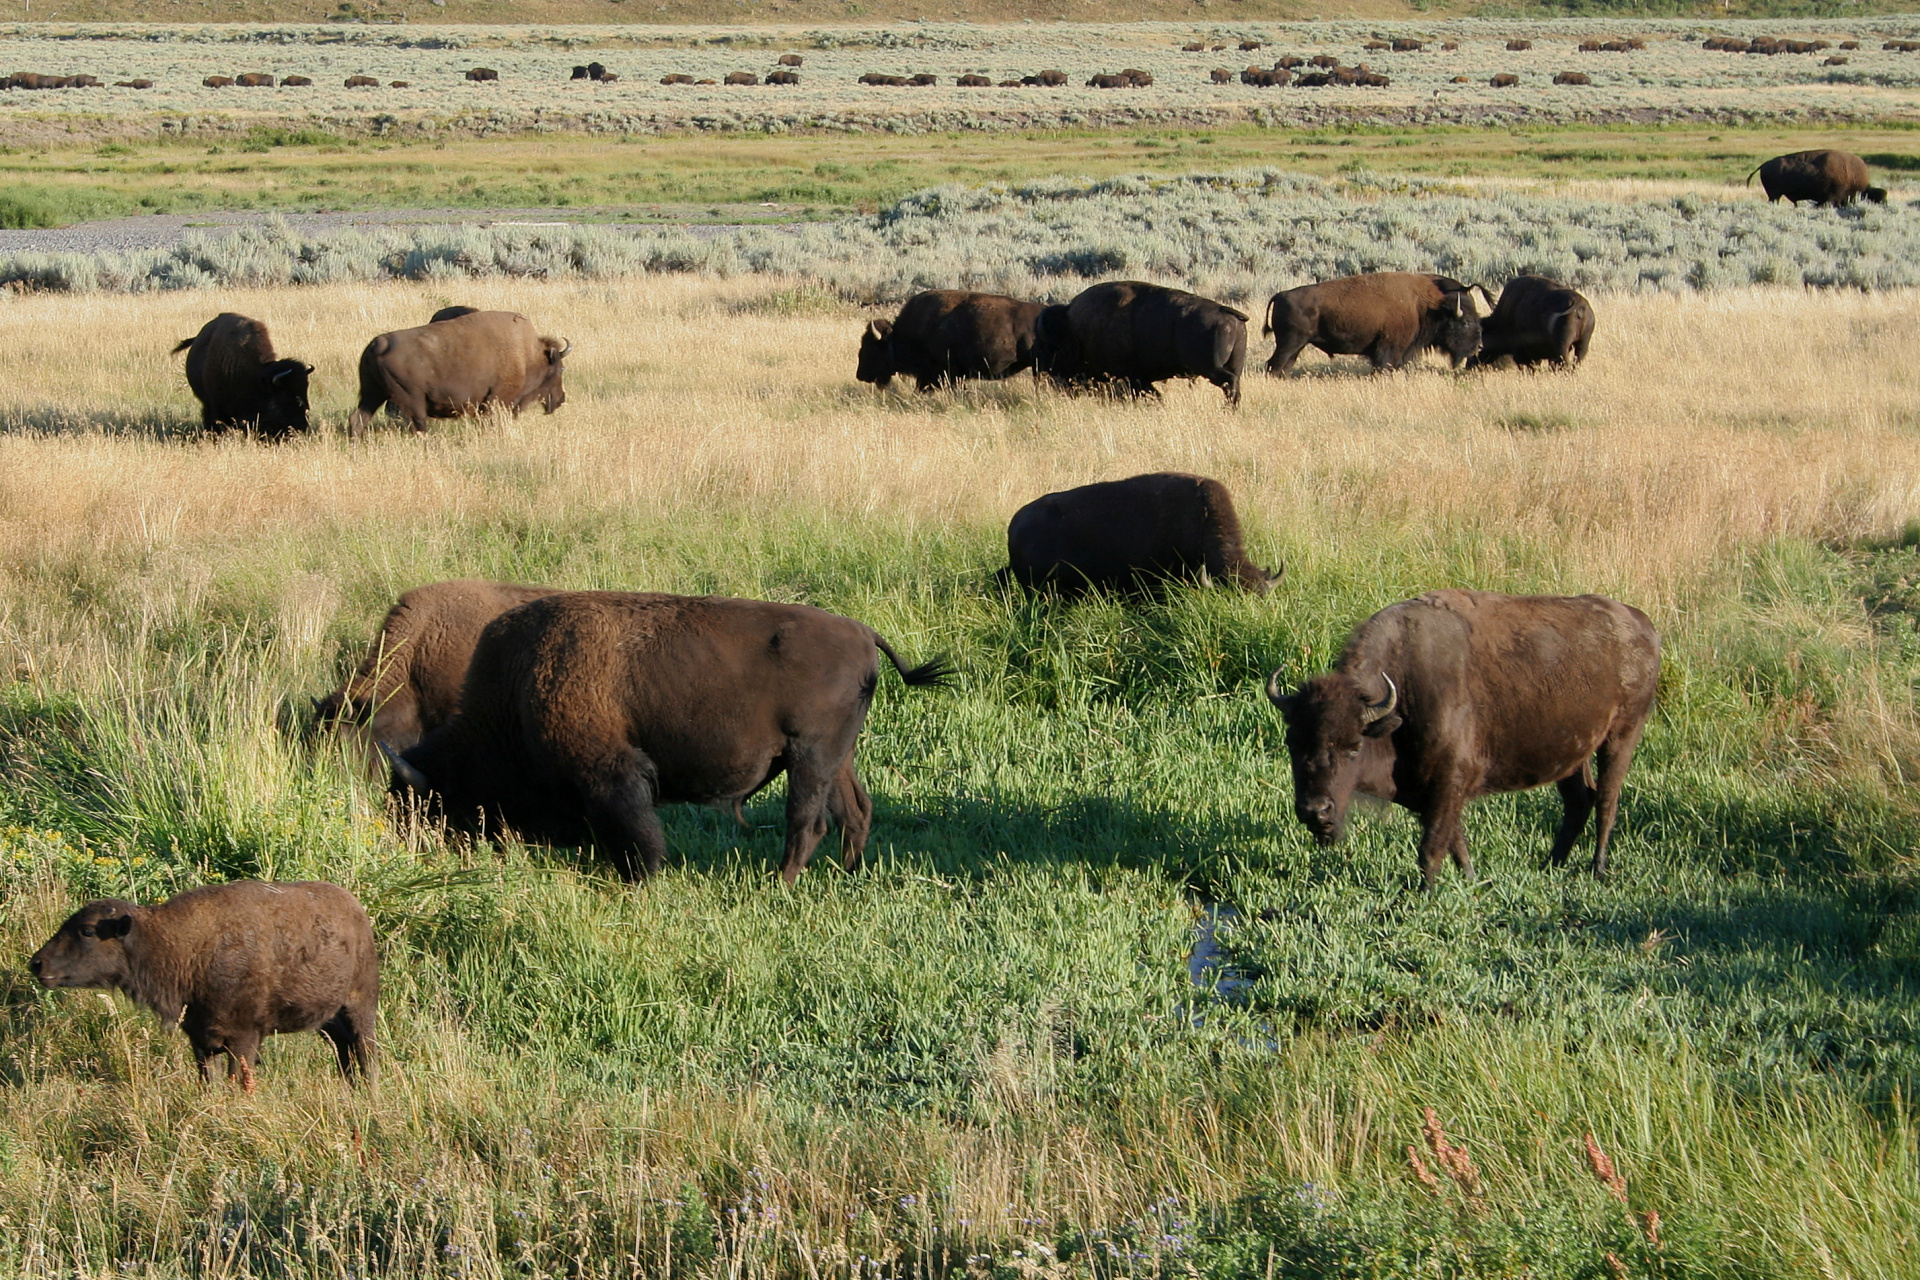 Third Herd (Travels » US Trip 1: Cheyenne Country » The Journey » Yellowstone National Park » Buffalos)